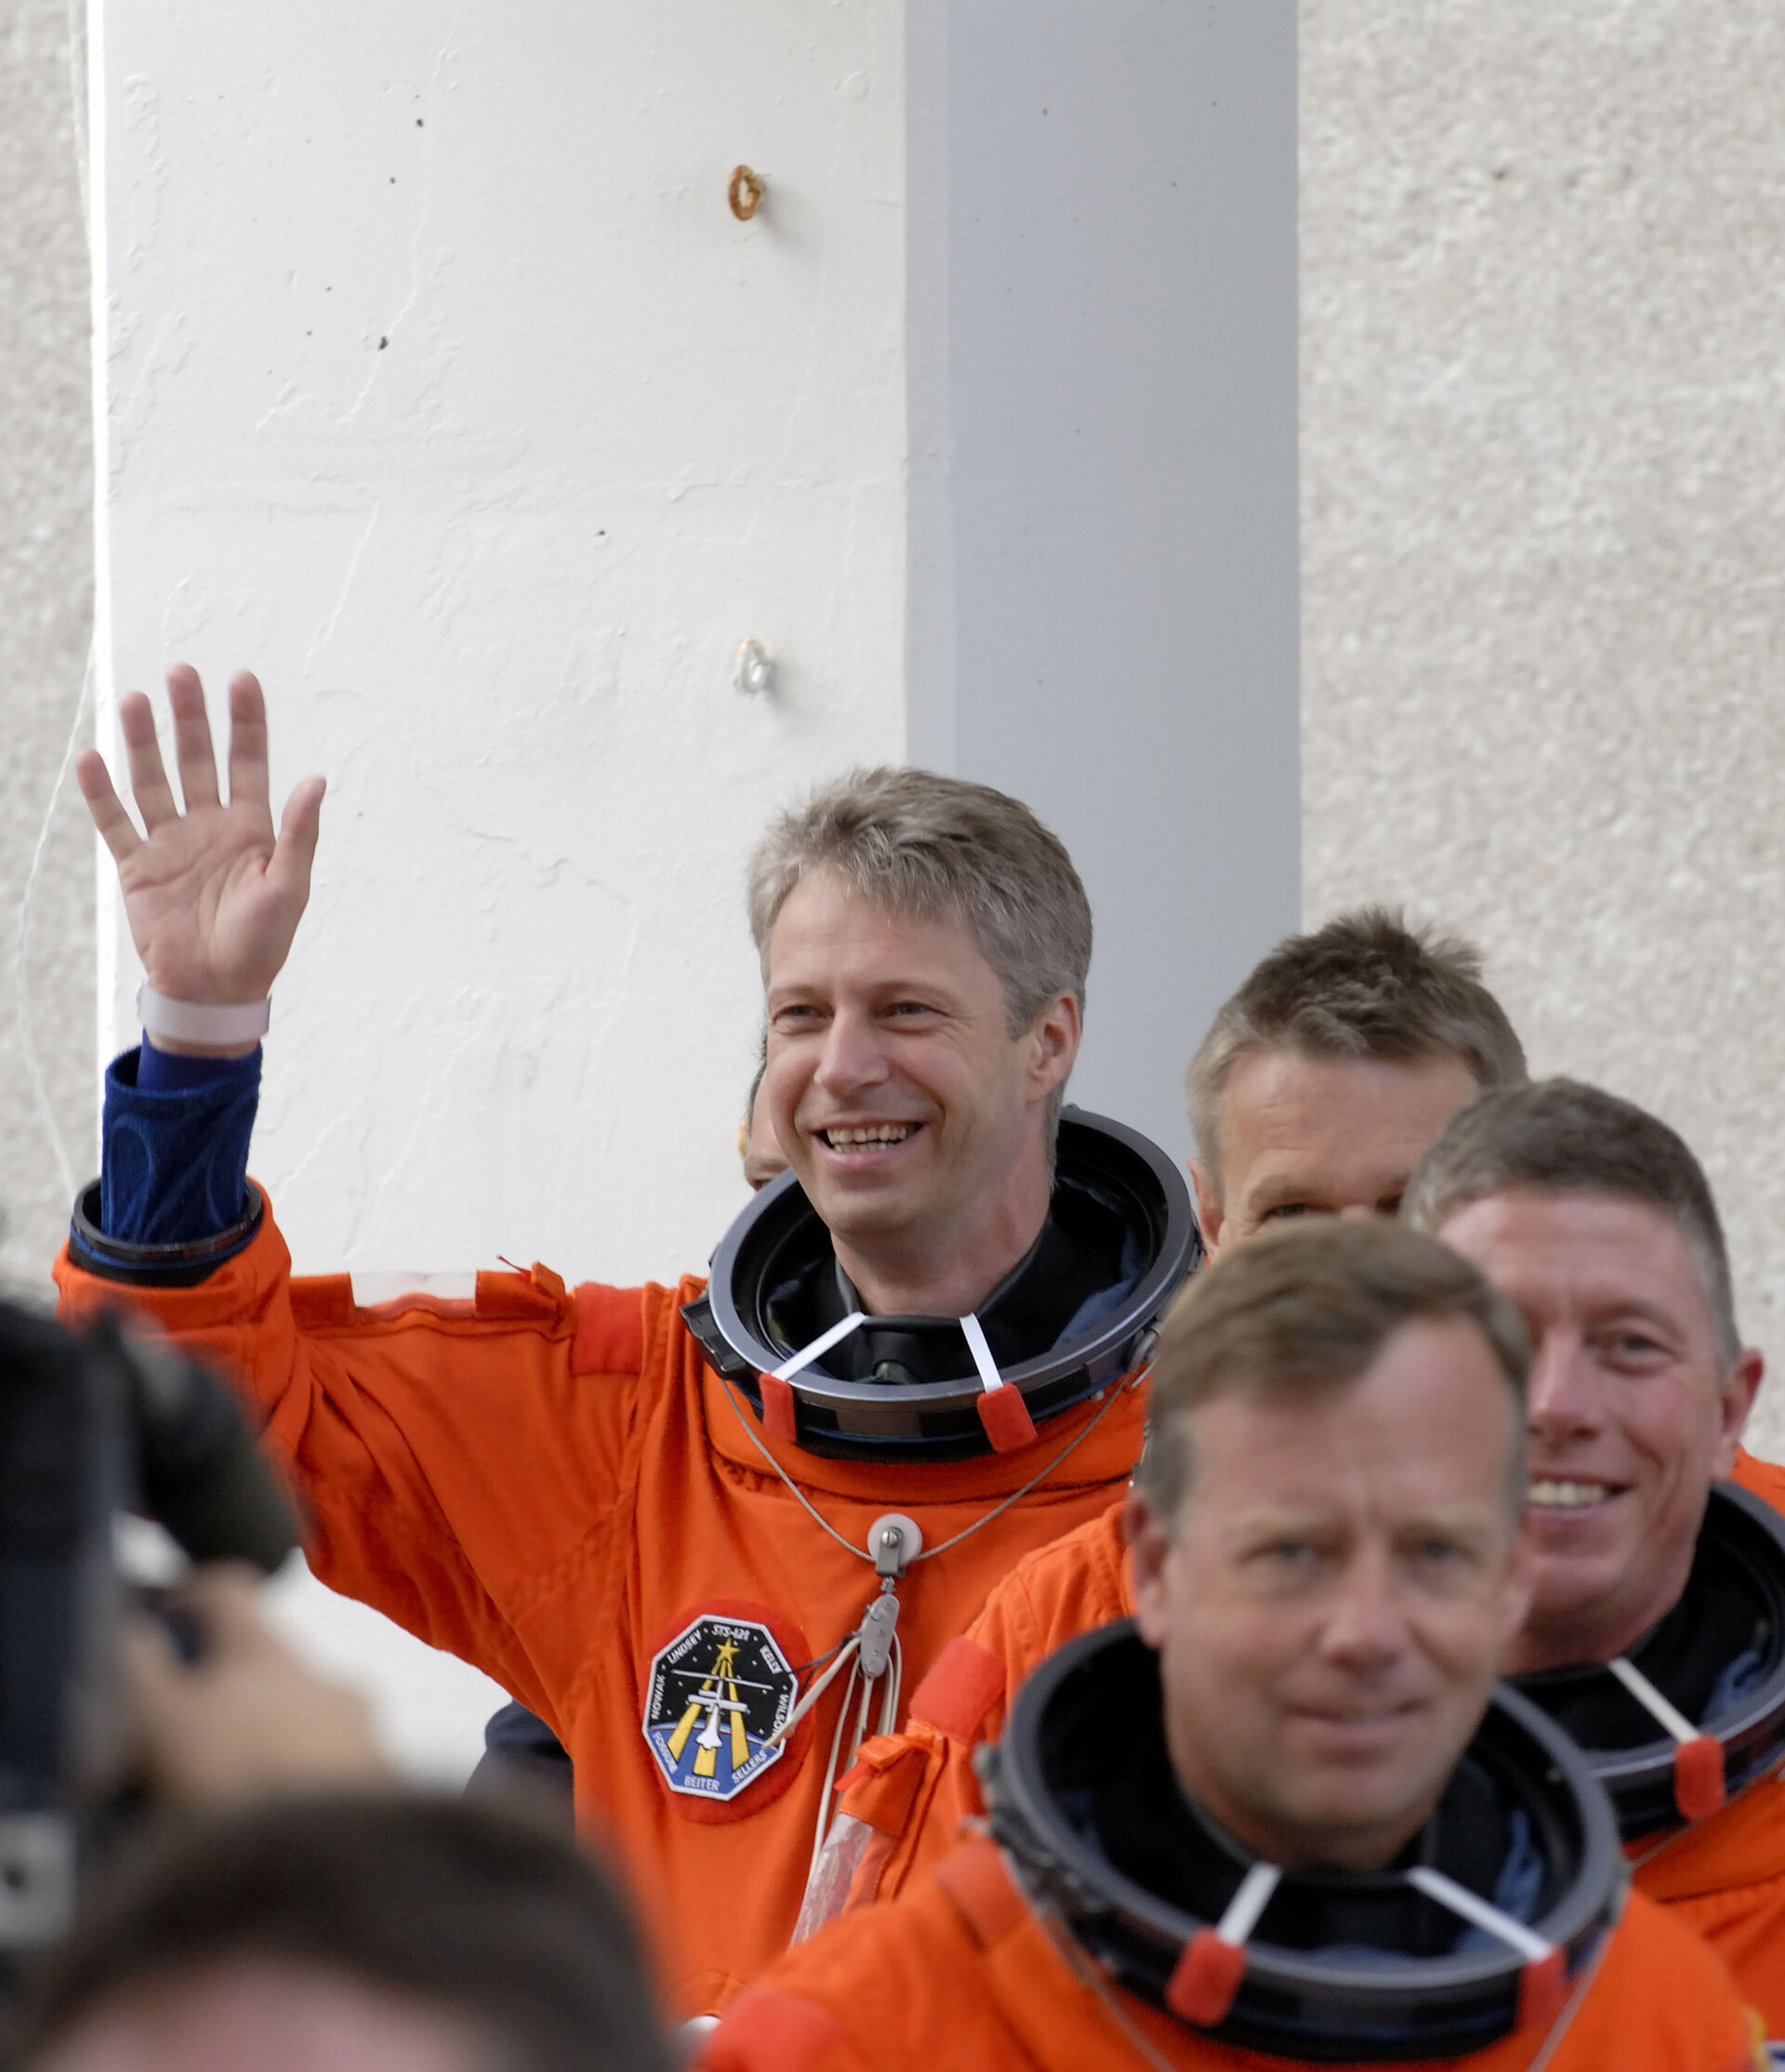 Thomas Reiter and fellow STS-121 crewmembers on their way to the practice countdown at Kennedy Space Center